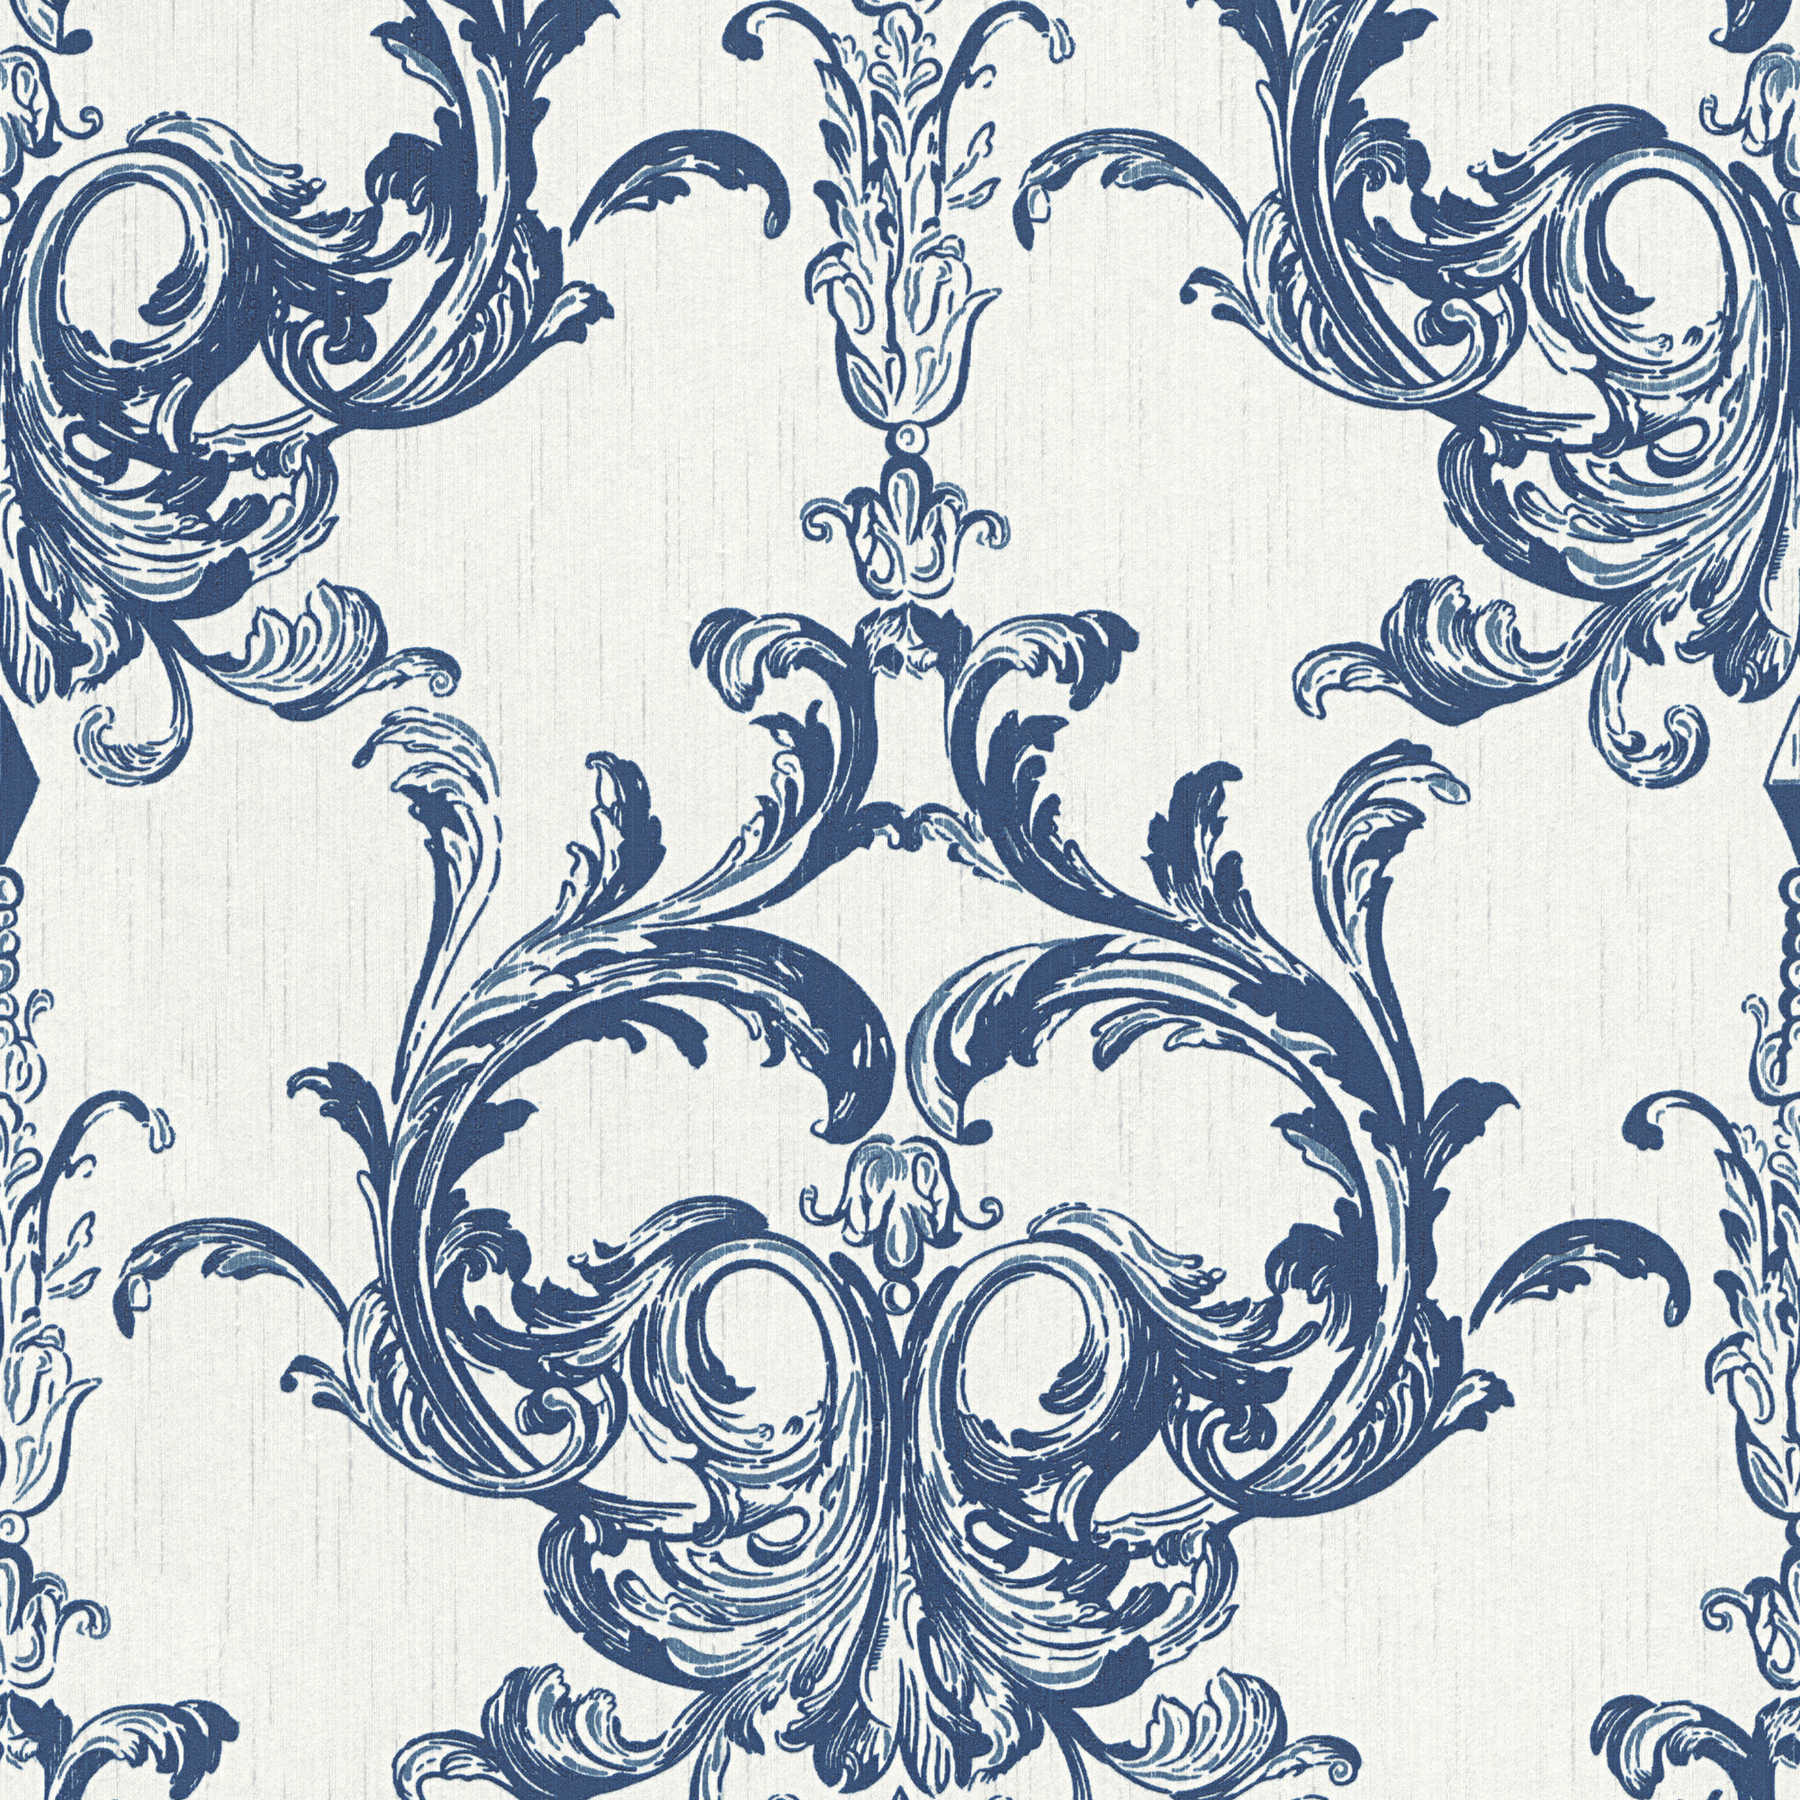 Ornament wallpaper with climbing pattern - blue, white
